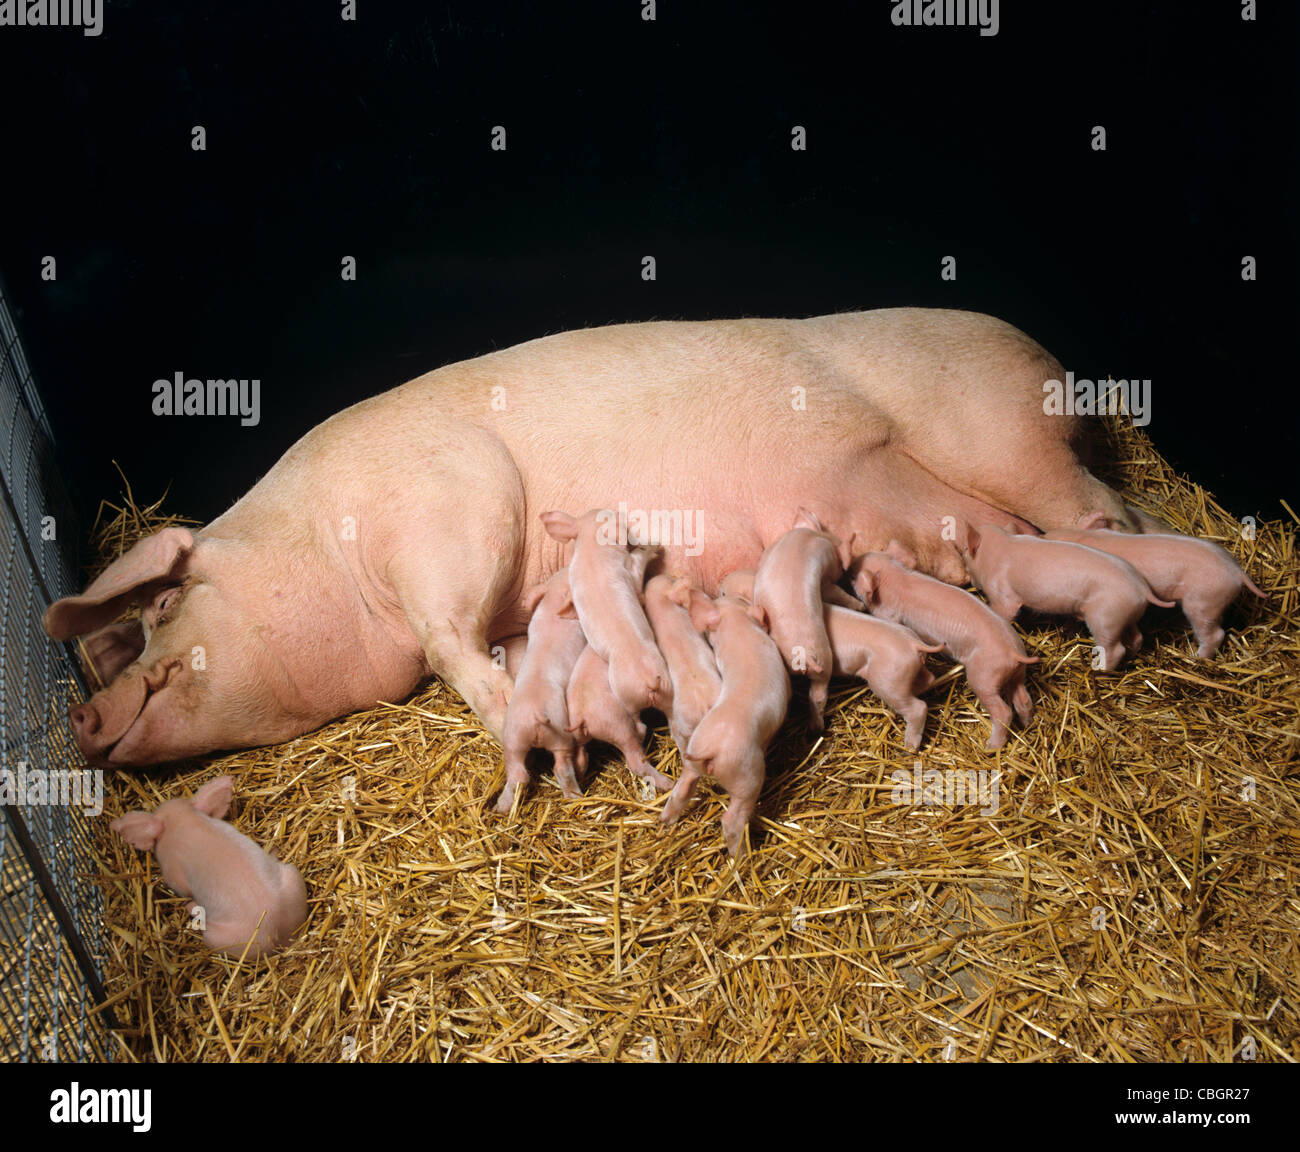 Large white sow with four day old piglets suckling Stock Photo